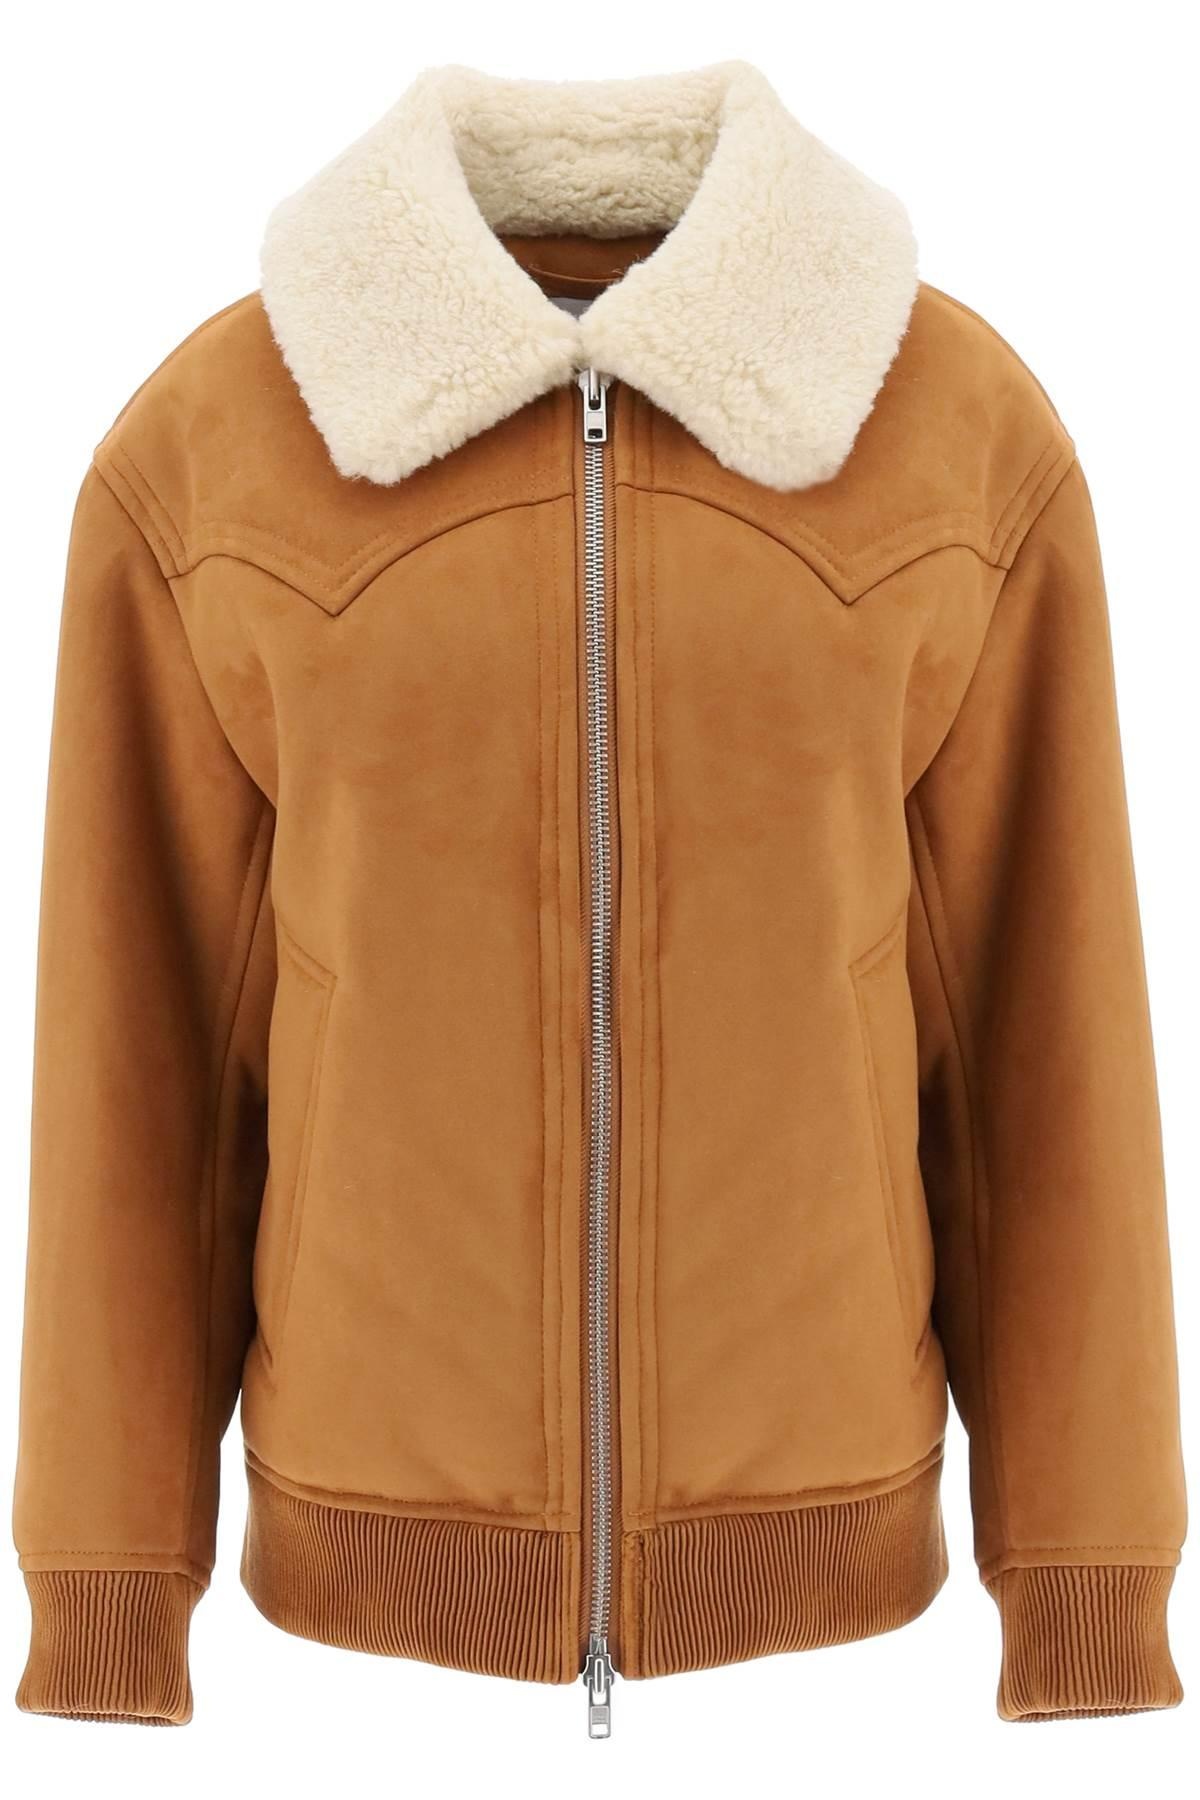 Stand Studio Lillee Eco Shearling Bomber Jacket - 1